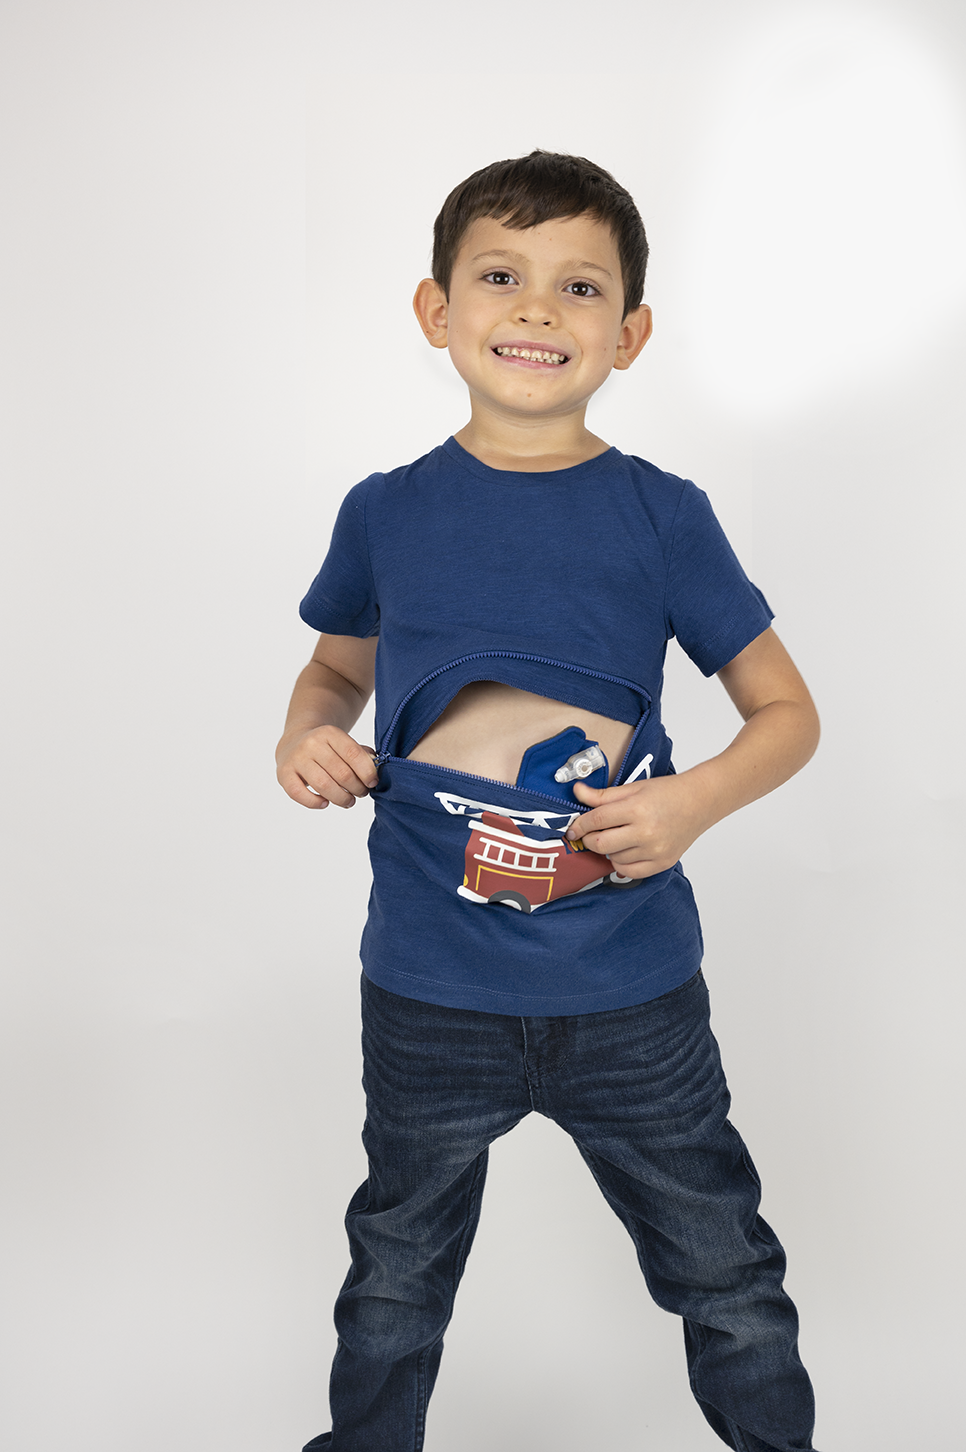 Boy wearing royal blue firetruck G-tube zip shirt with zipper for abdominal access open to show g-tube pad